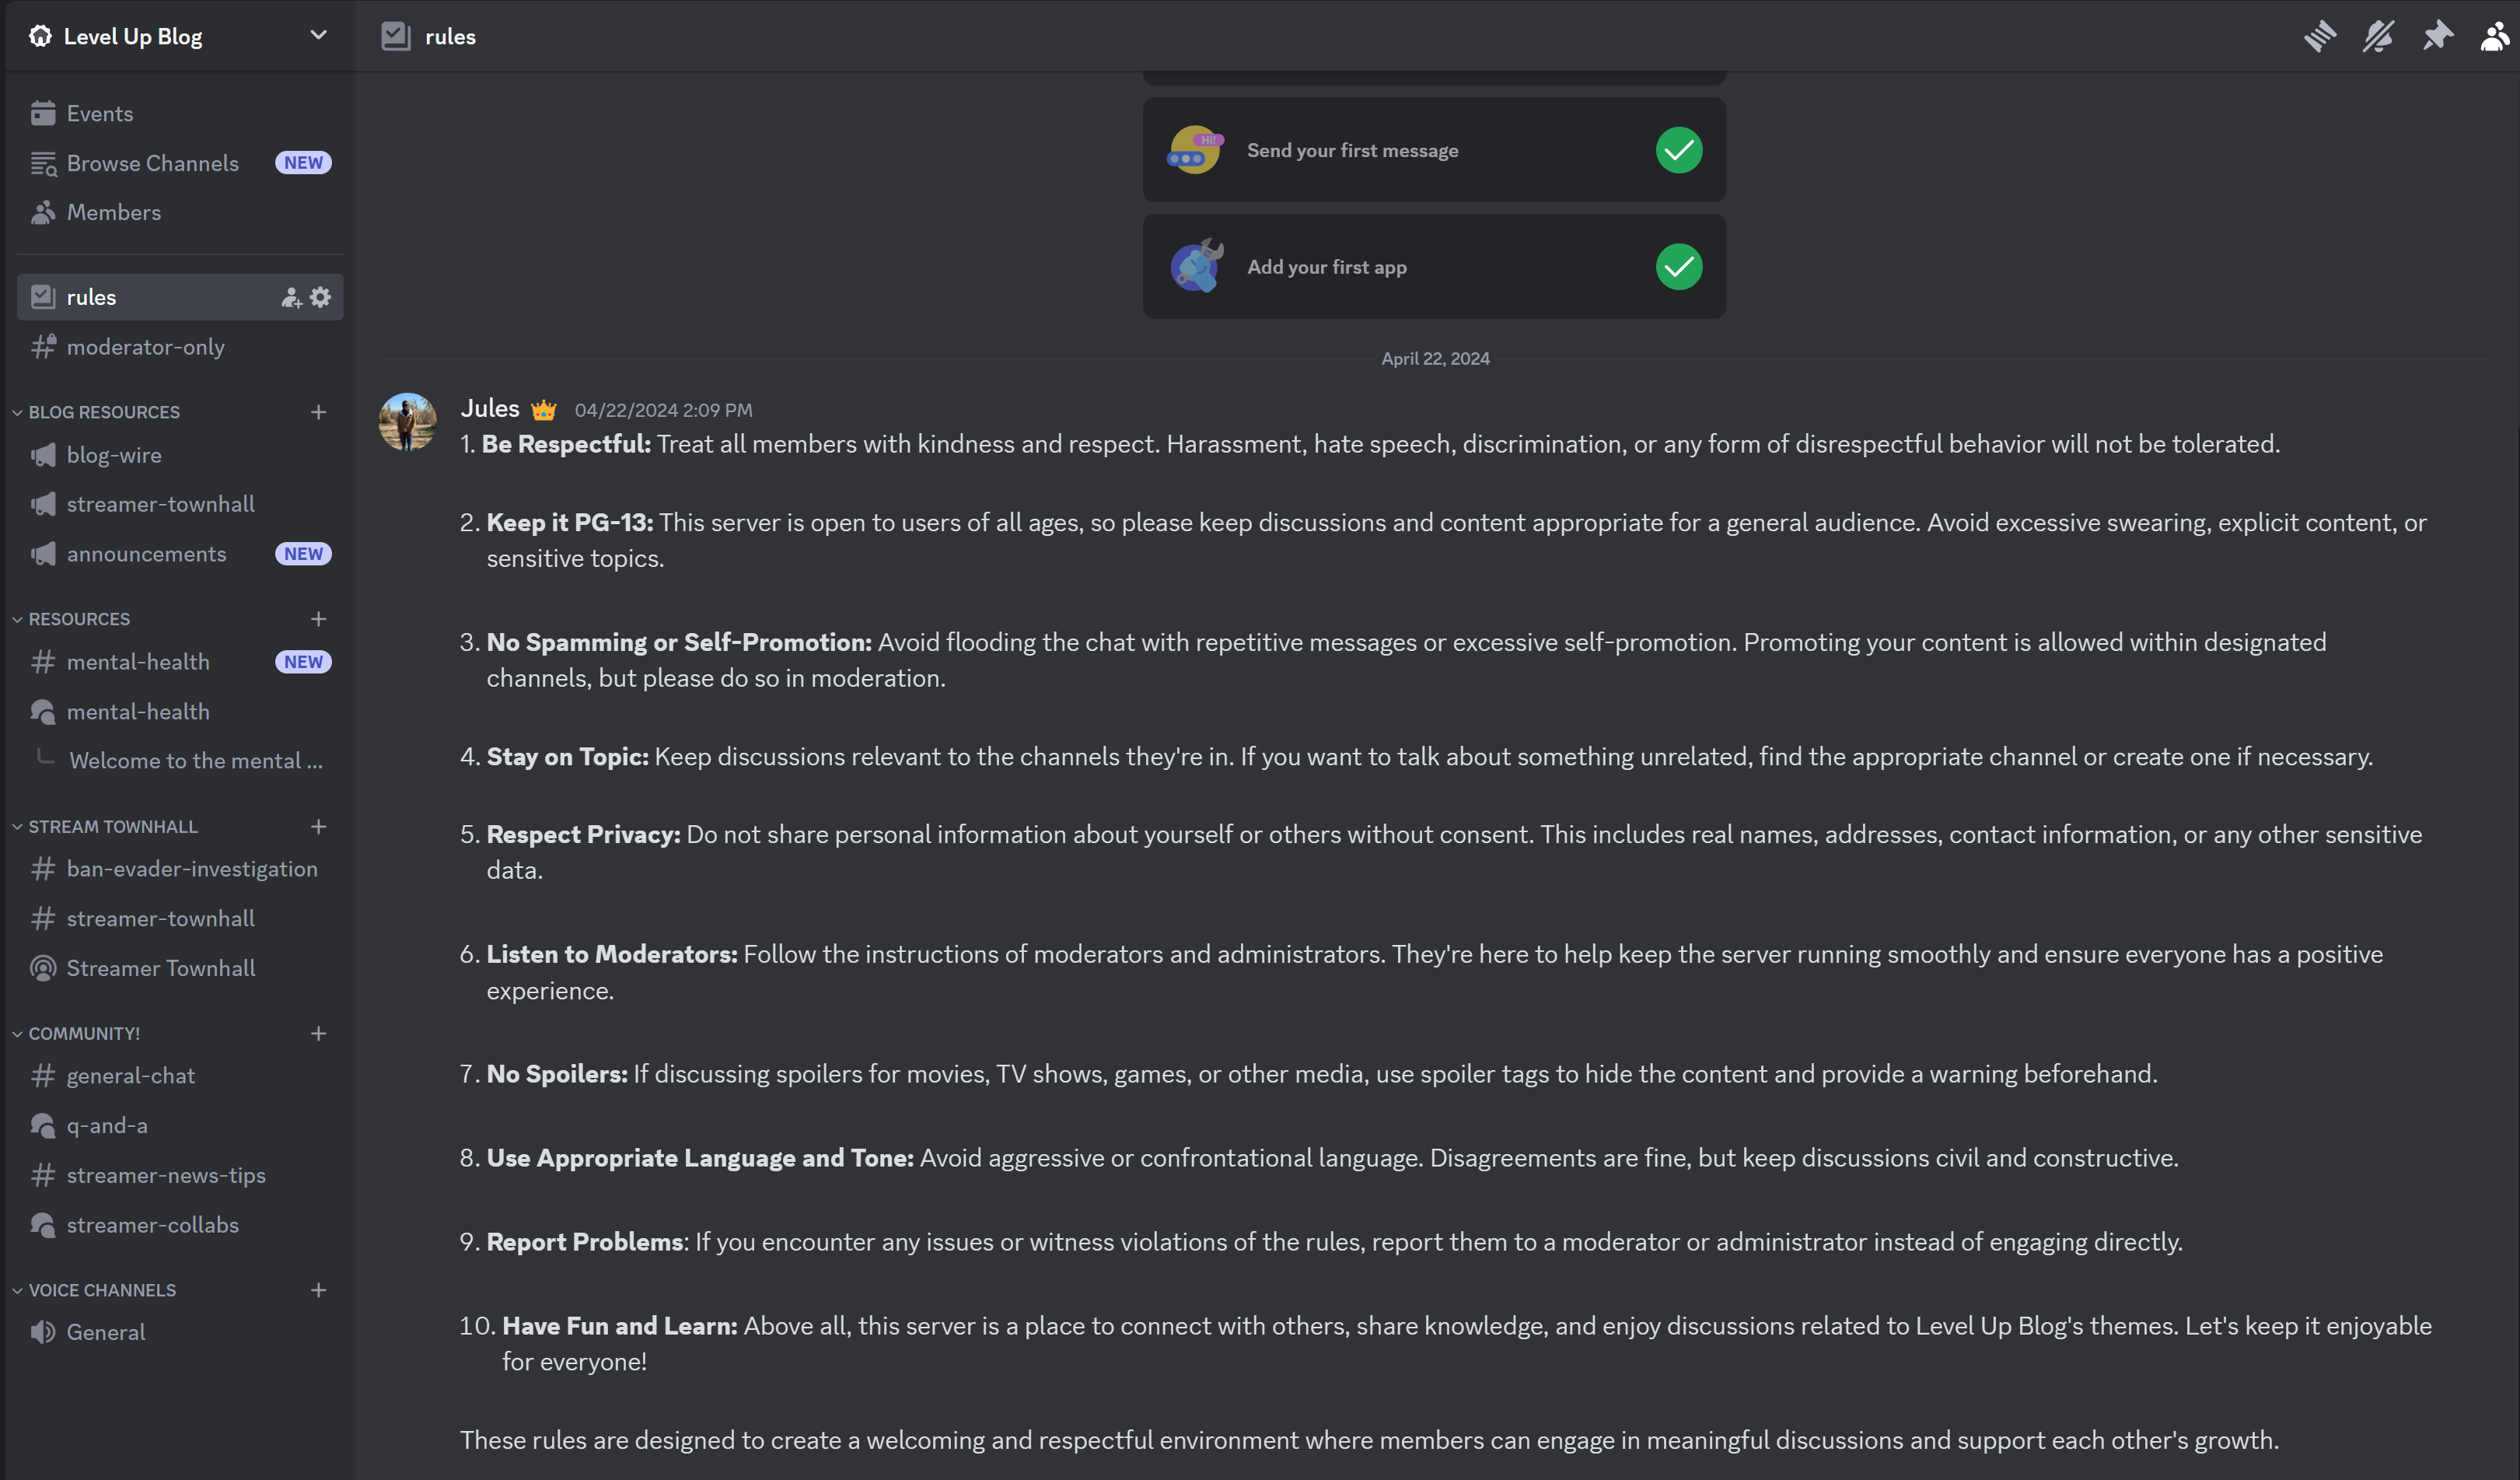 Level Up Blog launches Discord server